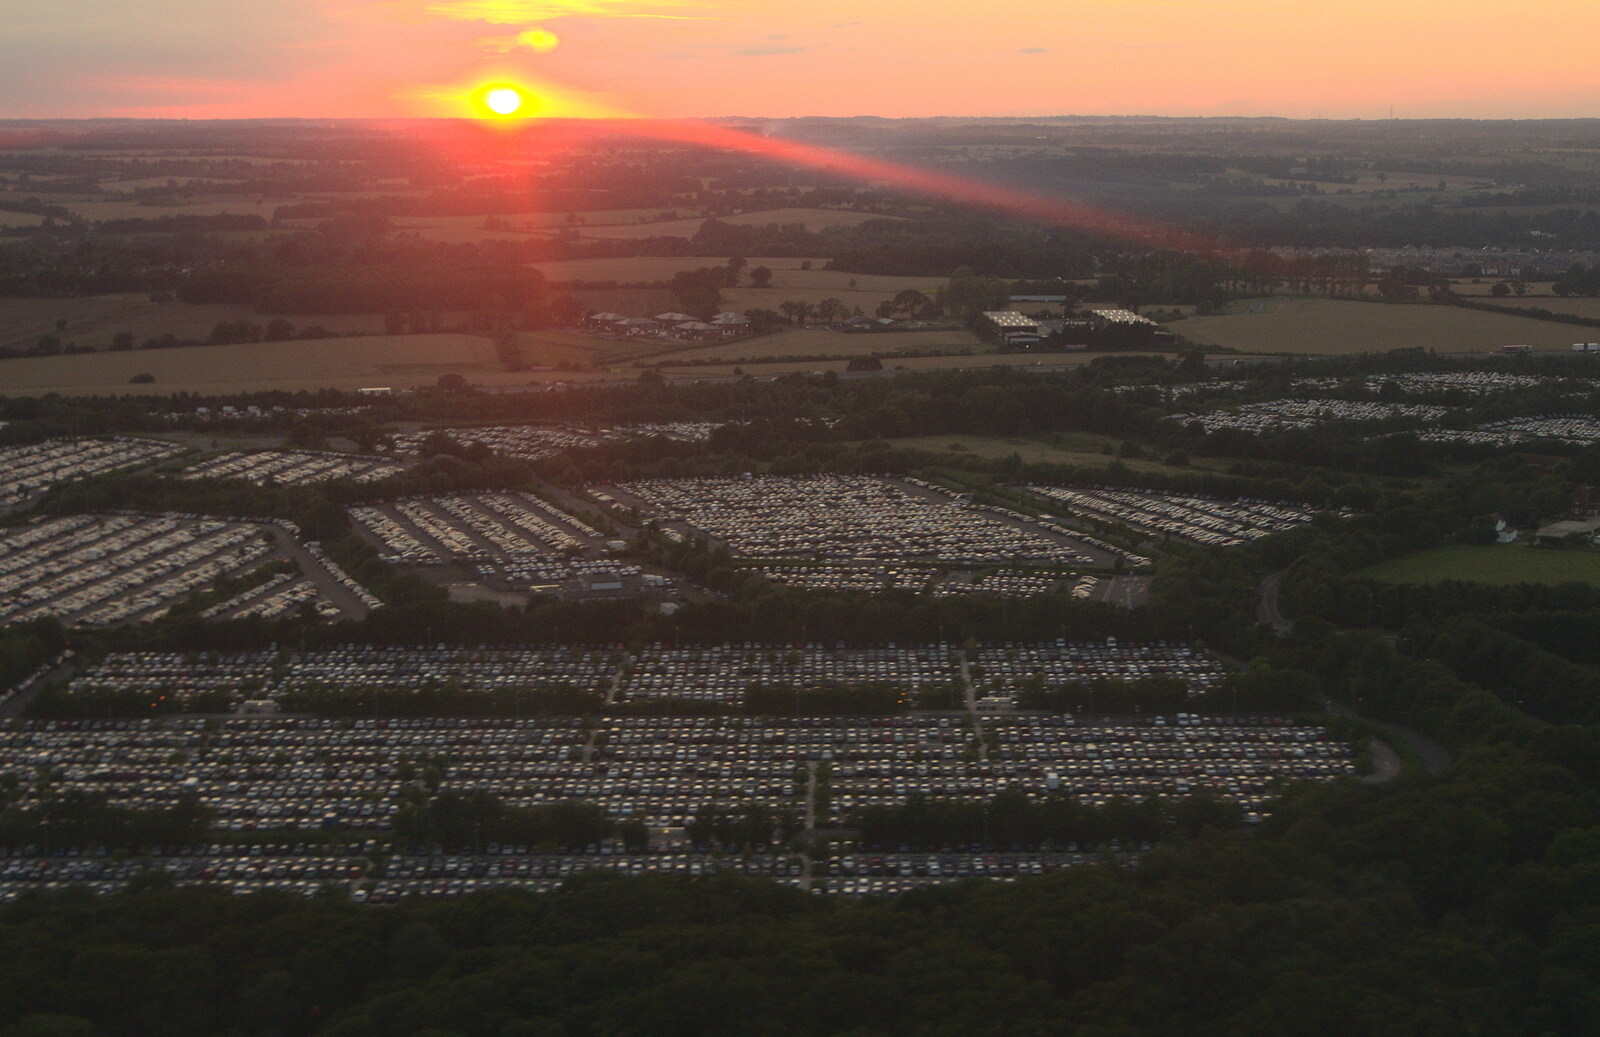 Stansted long-stay carpark from the air from Camping at Silver Strand, Wicklow, County Wicklow, Ireland - 7th August 2014